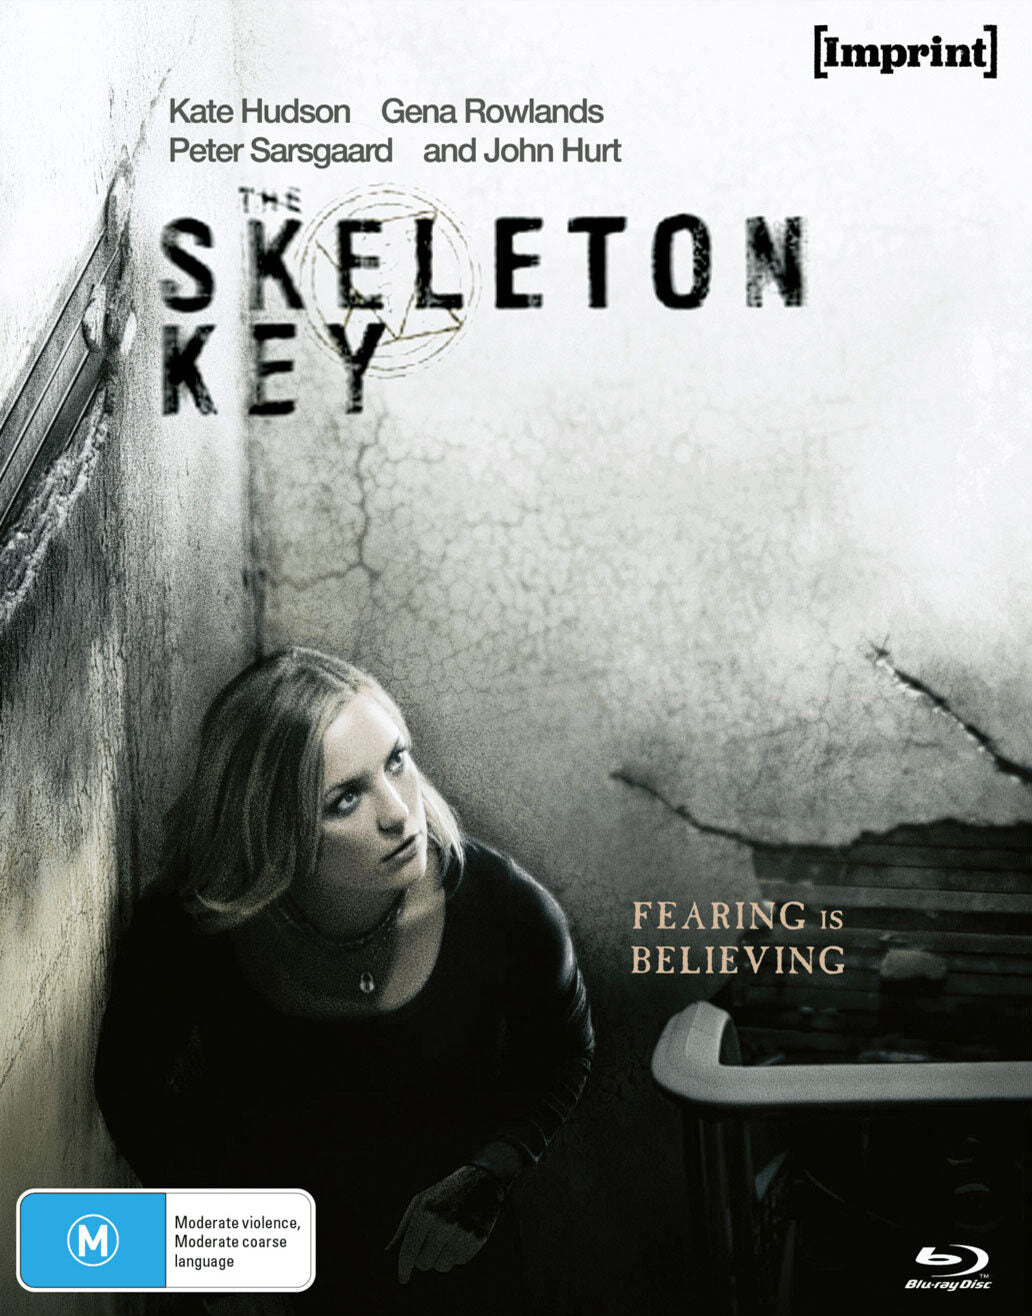 The Skeleton Key (2005) - front cover